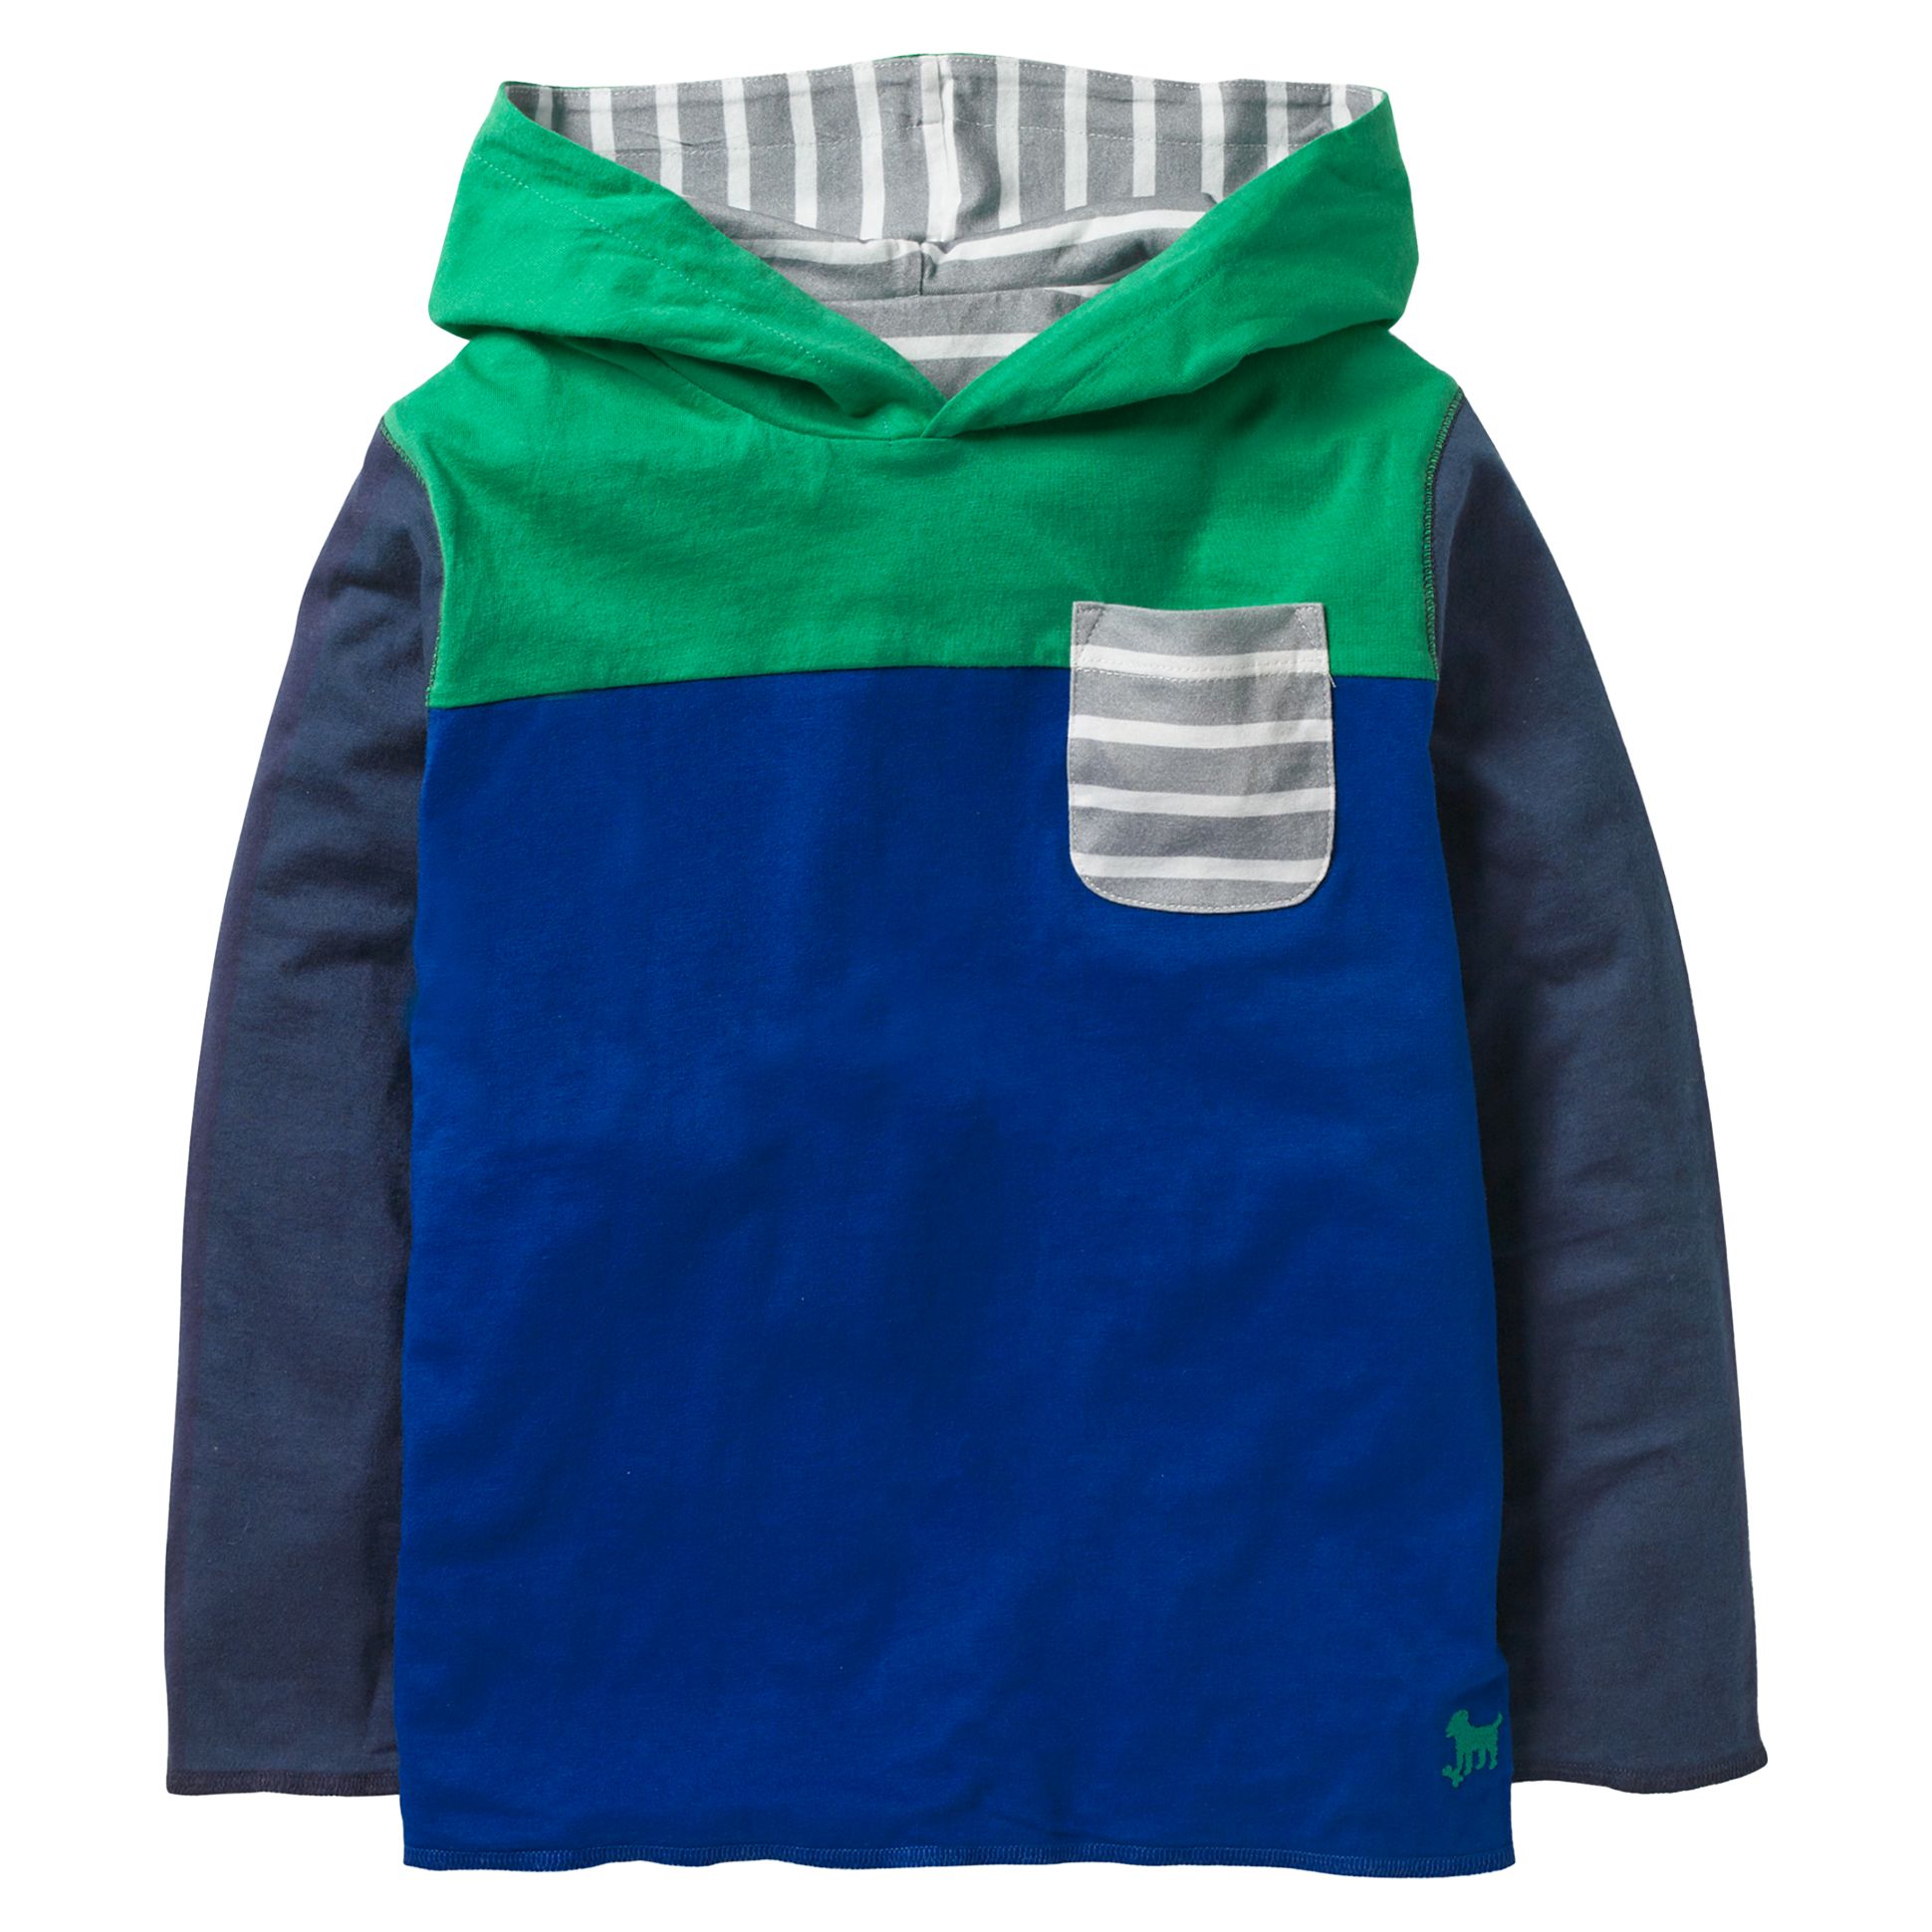 Mini Boden Boys' Reversible Hooded Top, Blue/Grey, 9-10 years